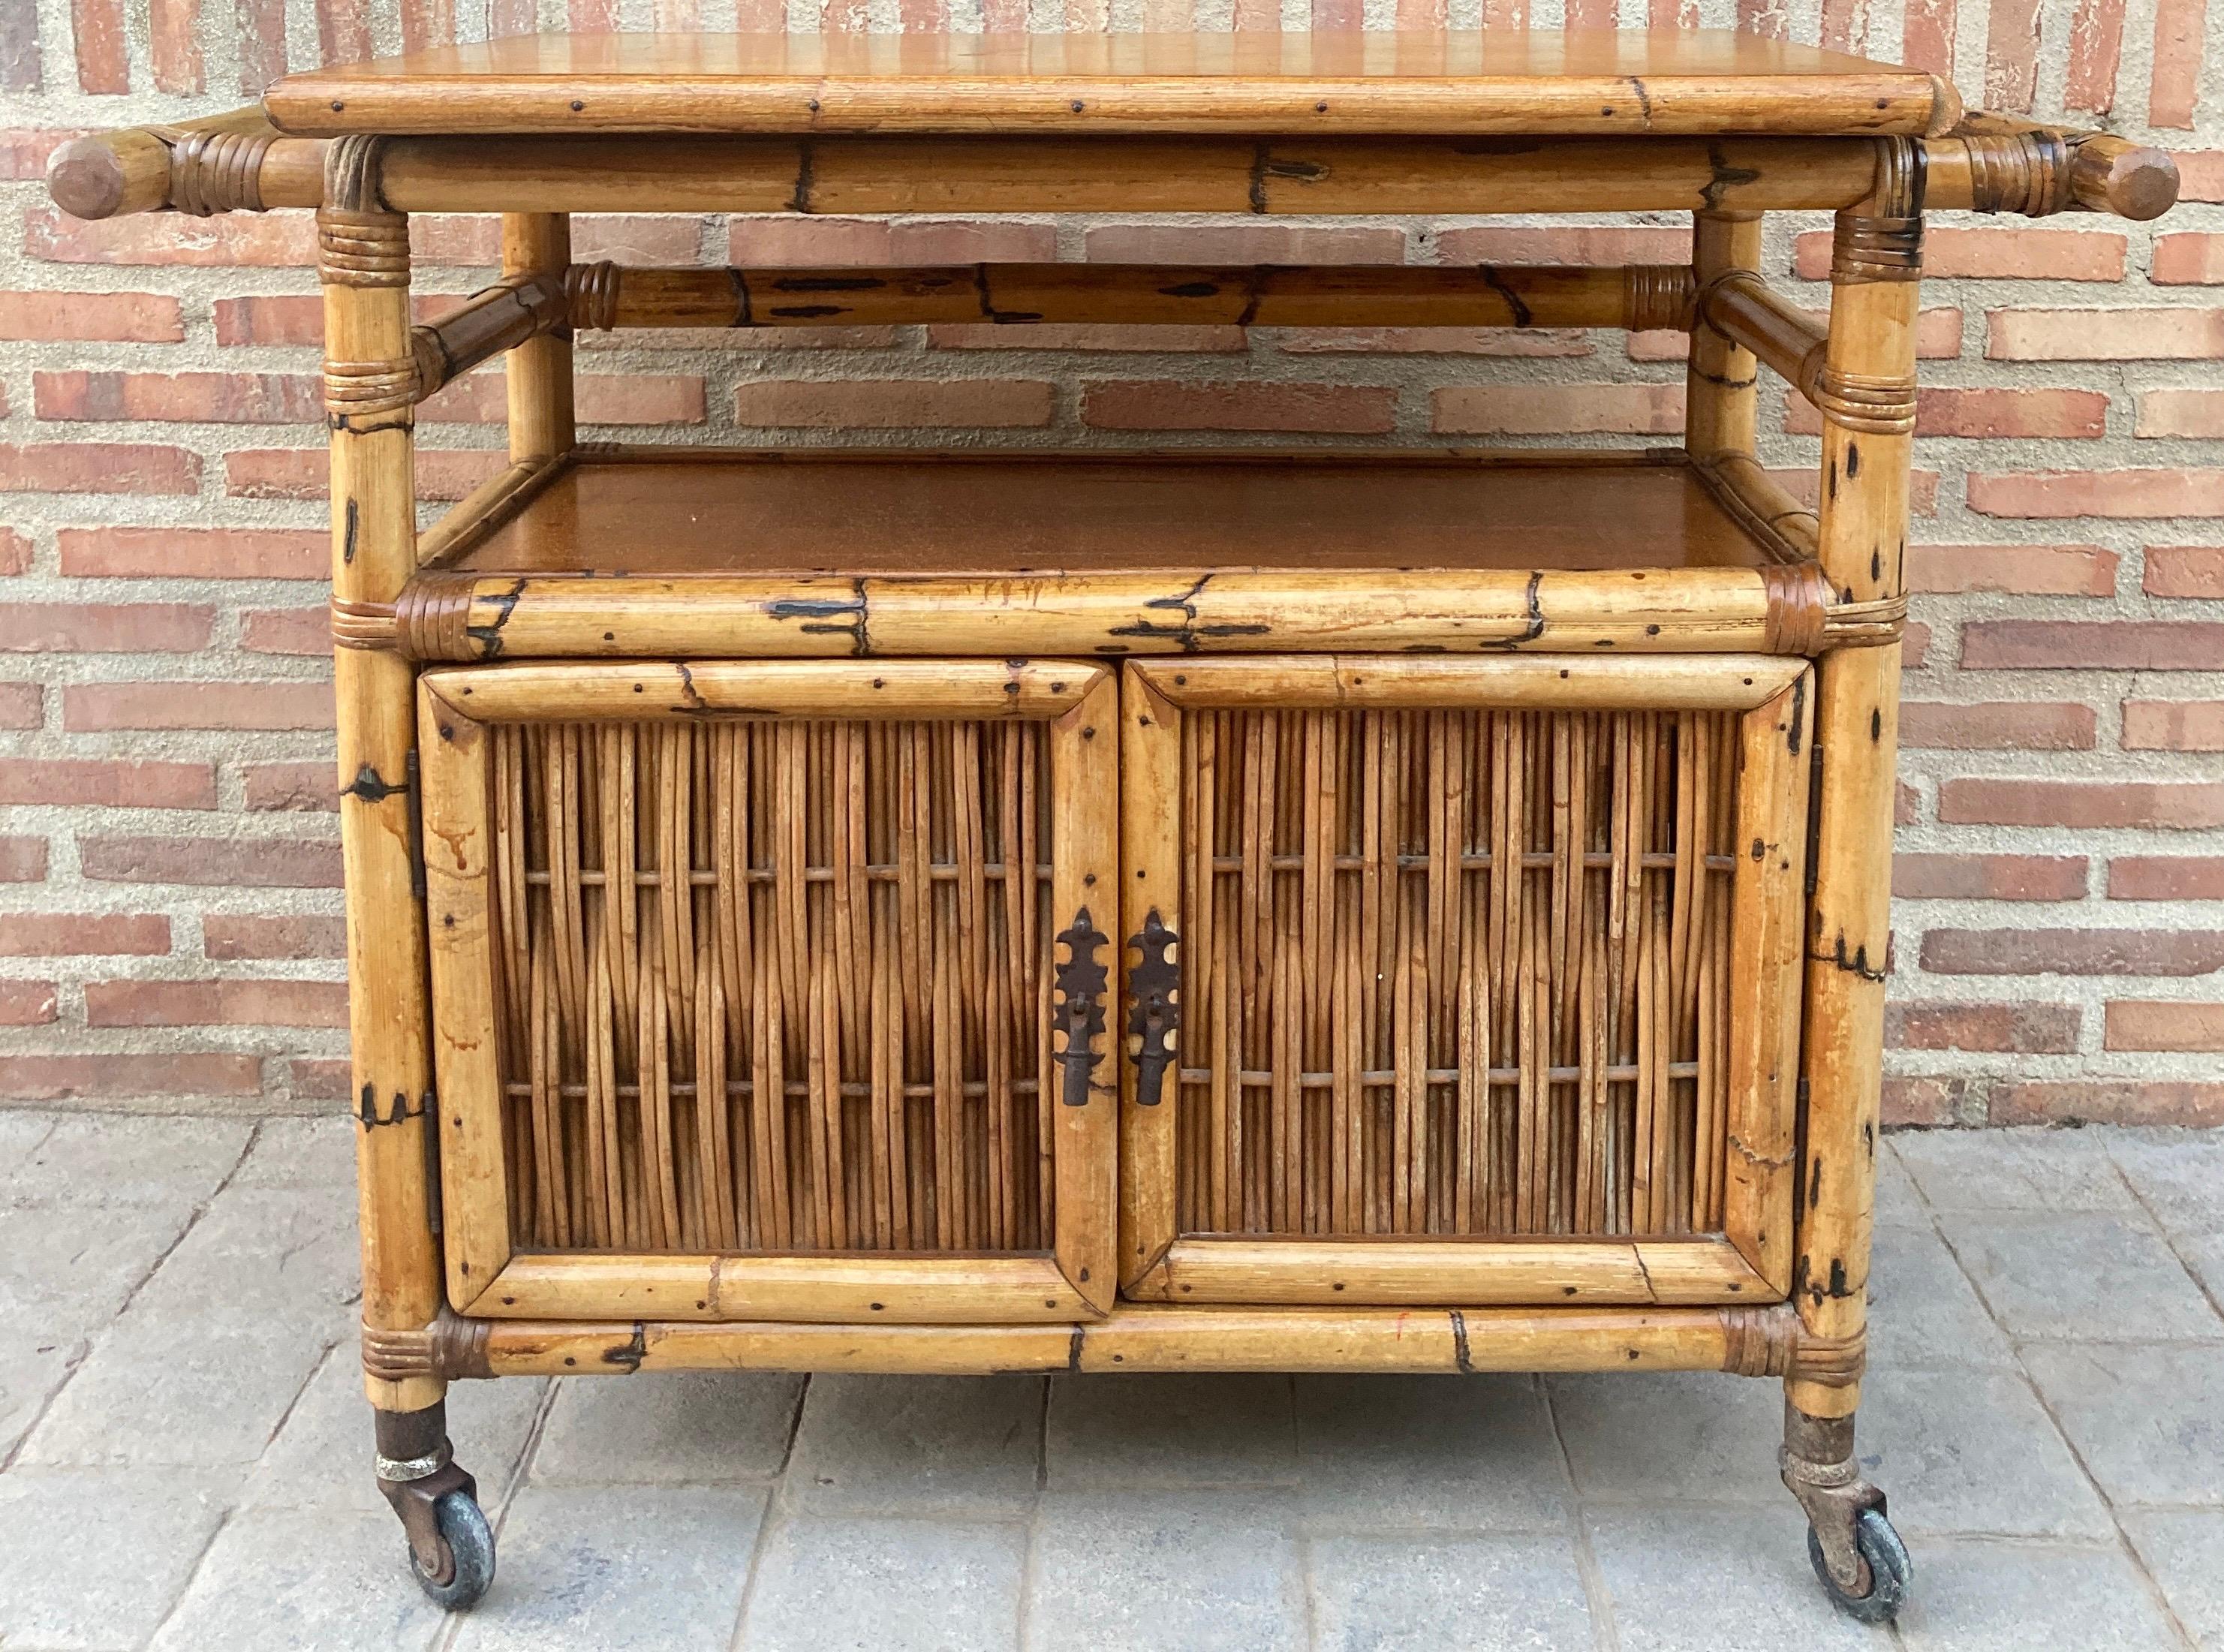 Beautiful Spanish bamboo bar cabinet from the 1950s with a cupboard door and a lower shelf with a bottle rack.
On its legs it has wheels as a bar cart.
Design period 1950 to 1959. 
Year 1950.
Production period 1950 to 1959. 
Style vintage,